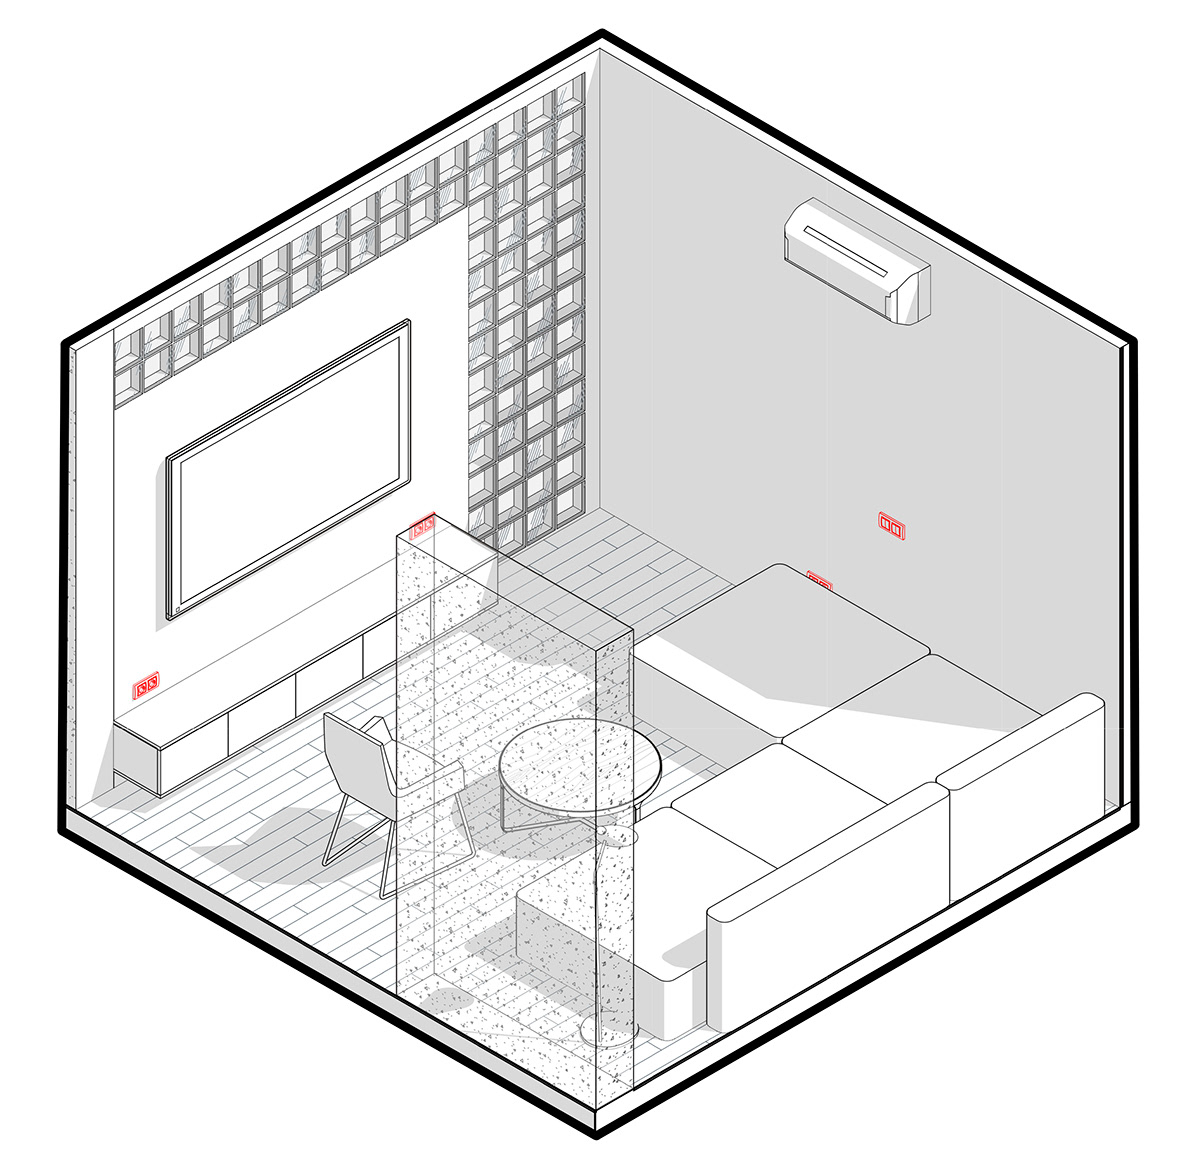 The layout of the living room